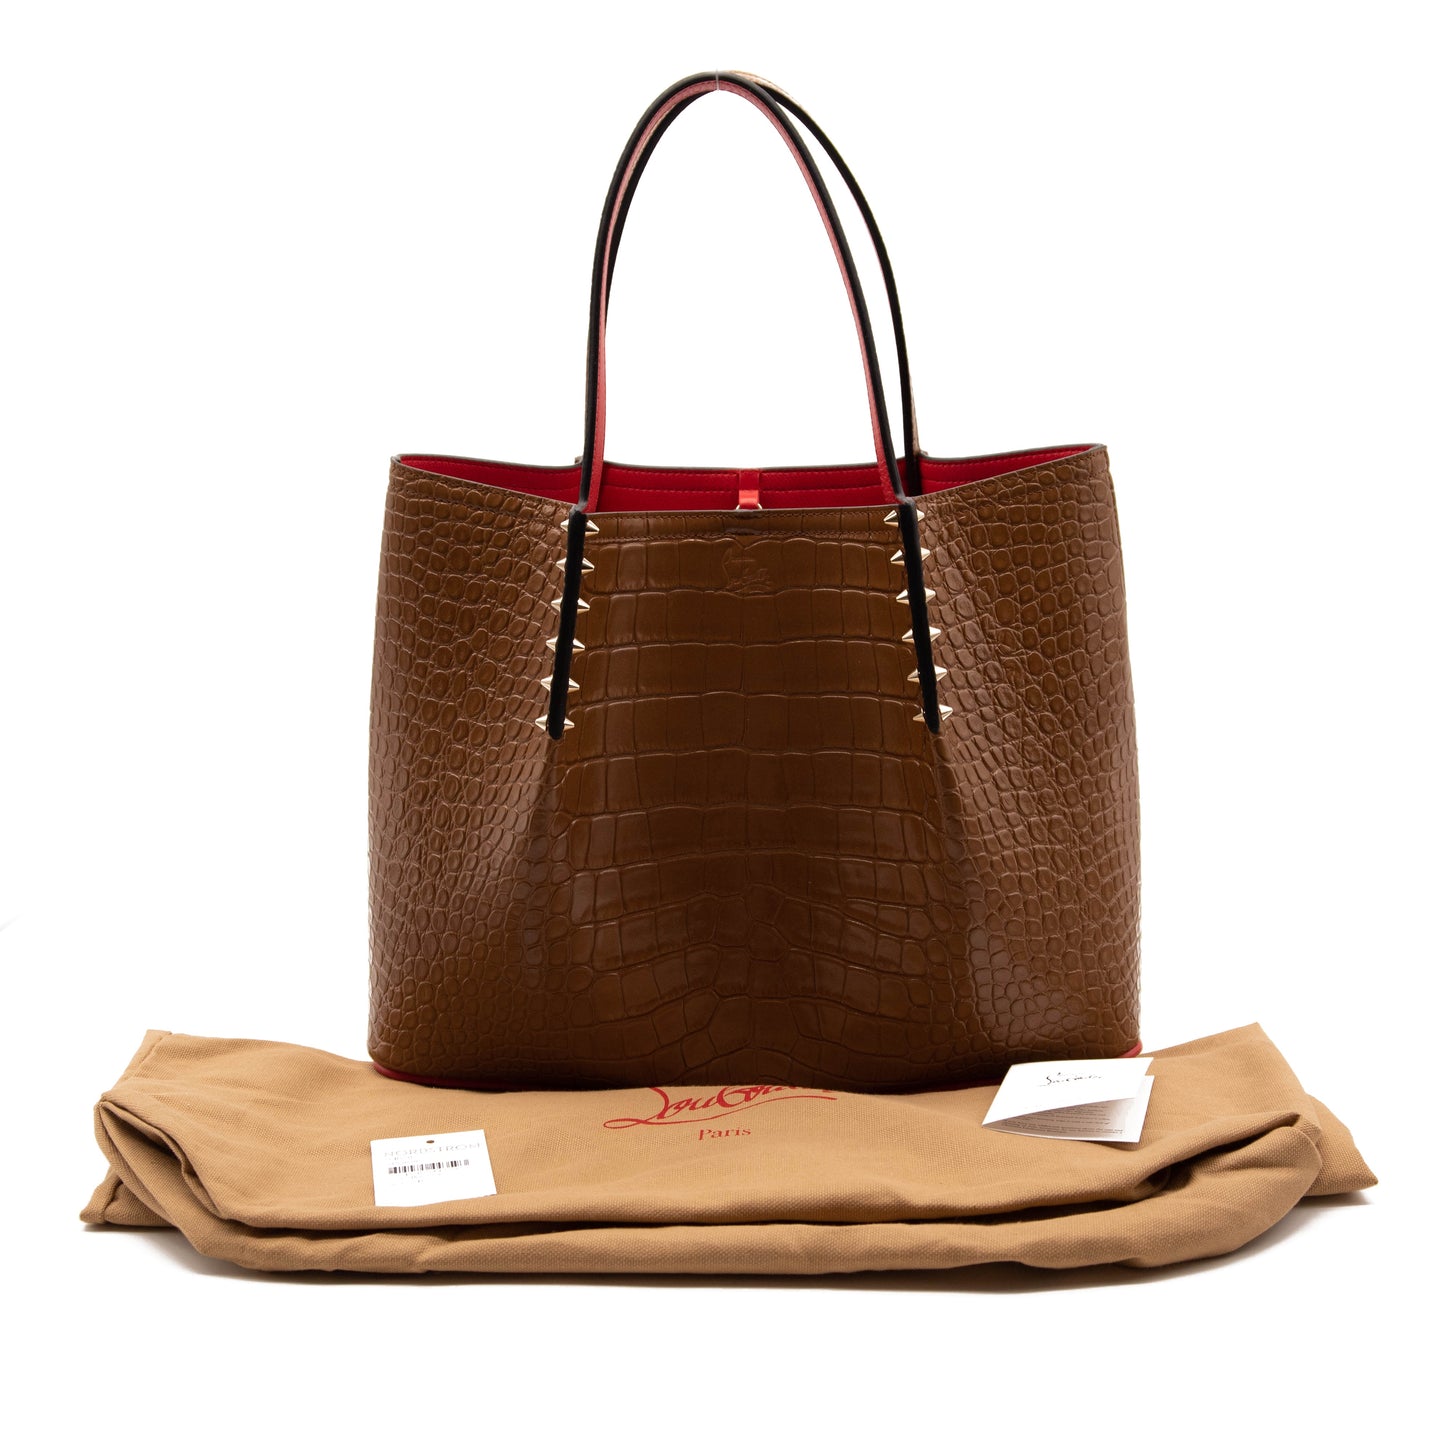 NEW Christian Louboutin Large Cabarock Croc Embossed Leather Tote Brown